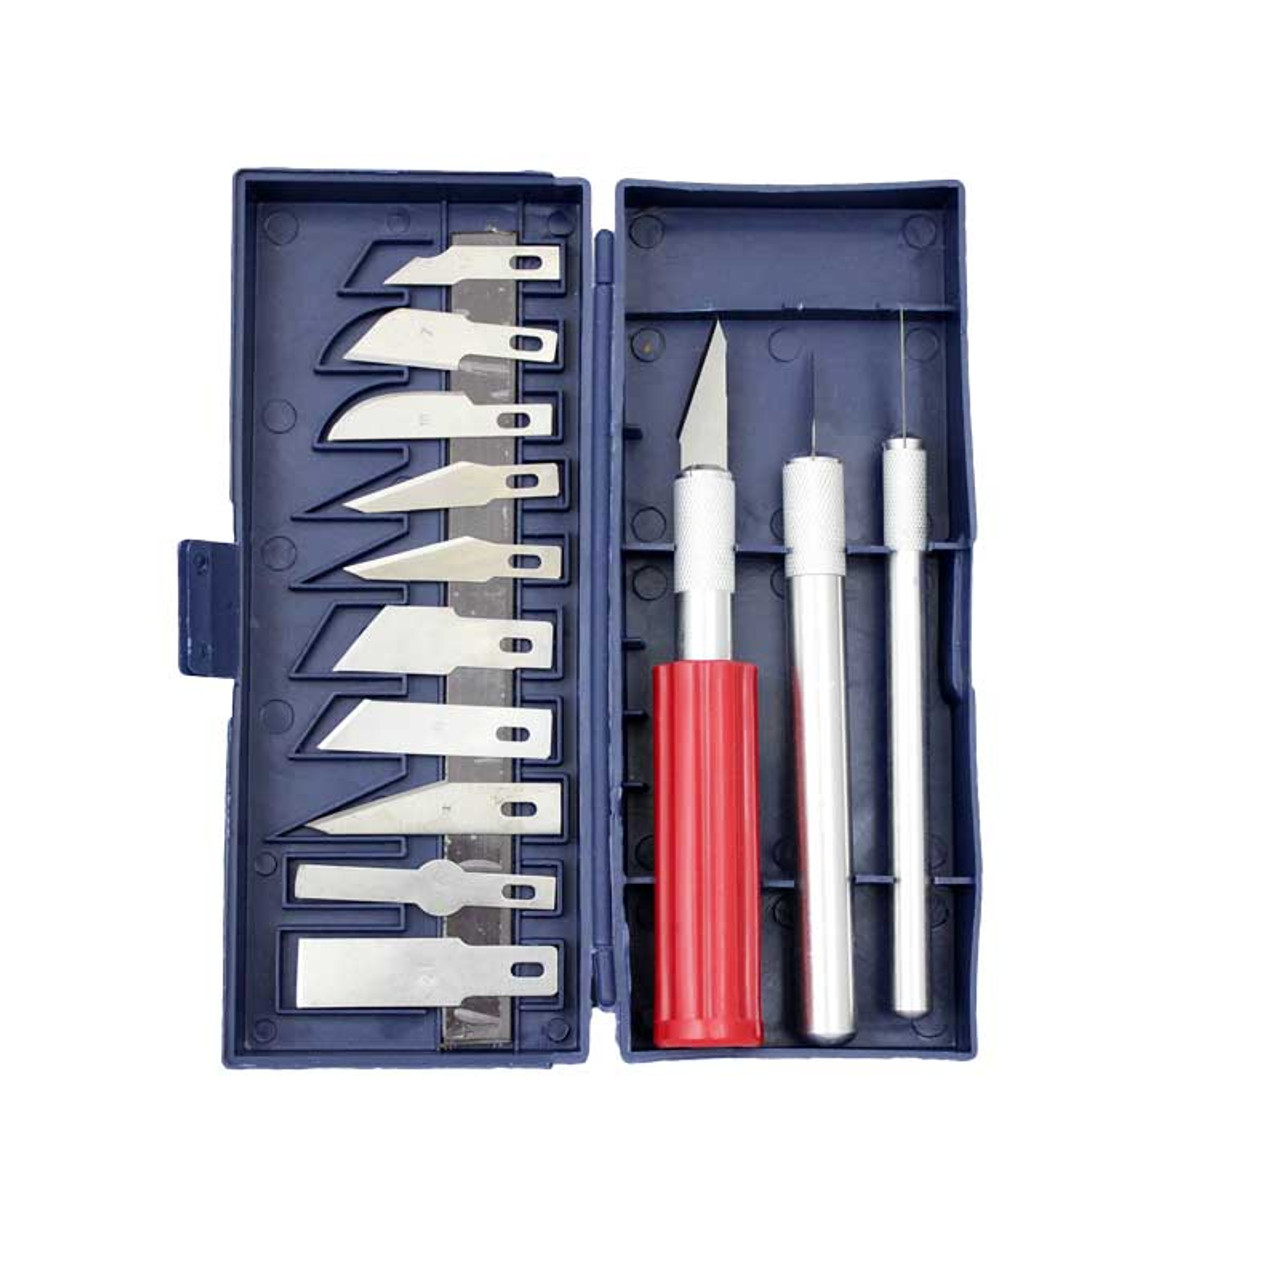 X-Acto - Do-It-Yourself Hobby Knife Set - Carded - 790-5028